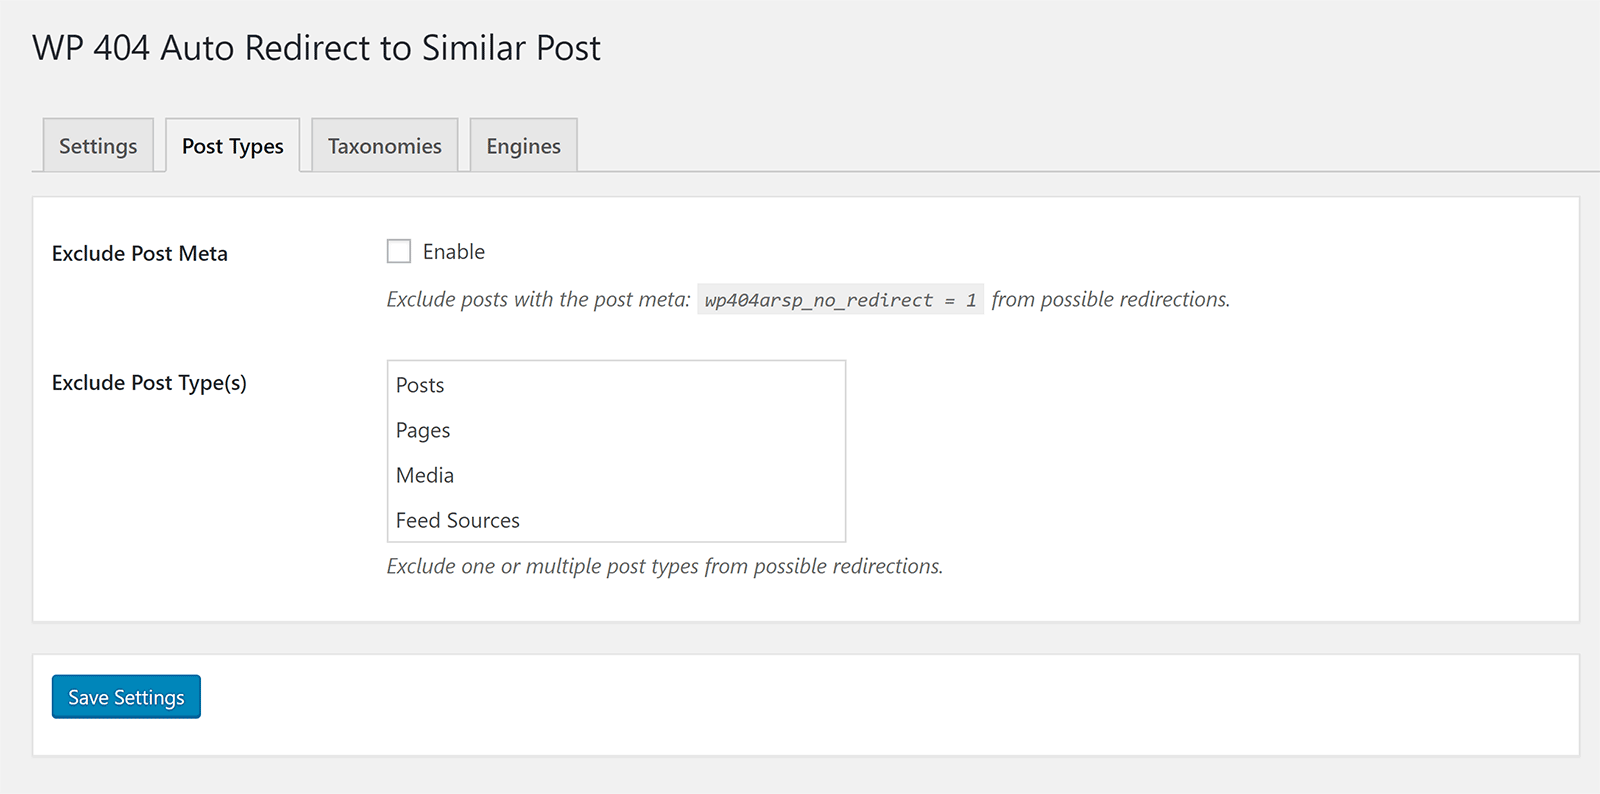 Post Types for WP 404 Auto Redirect to Similar Post